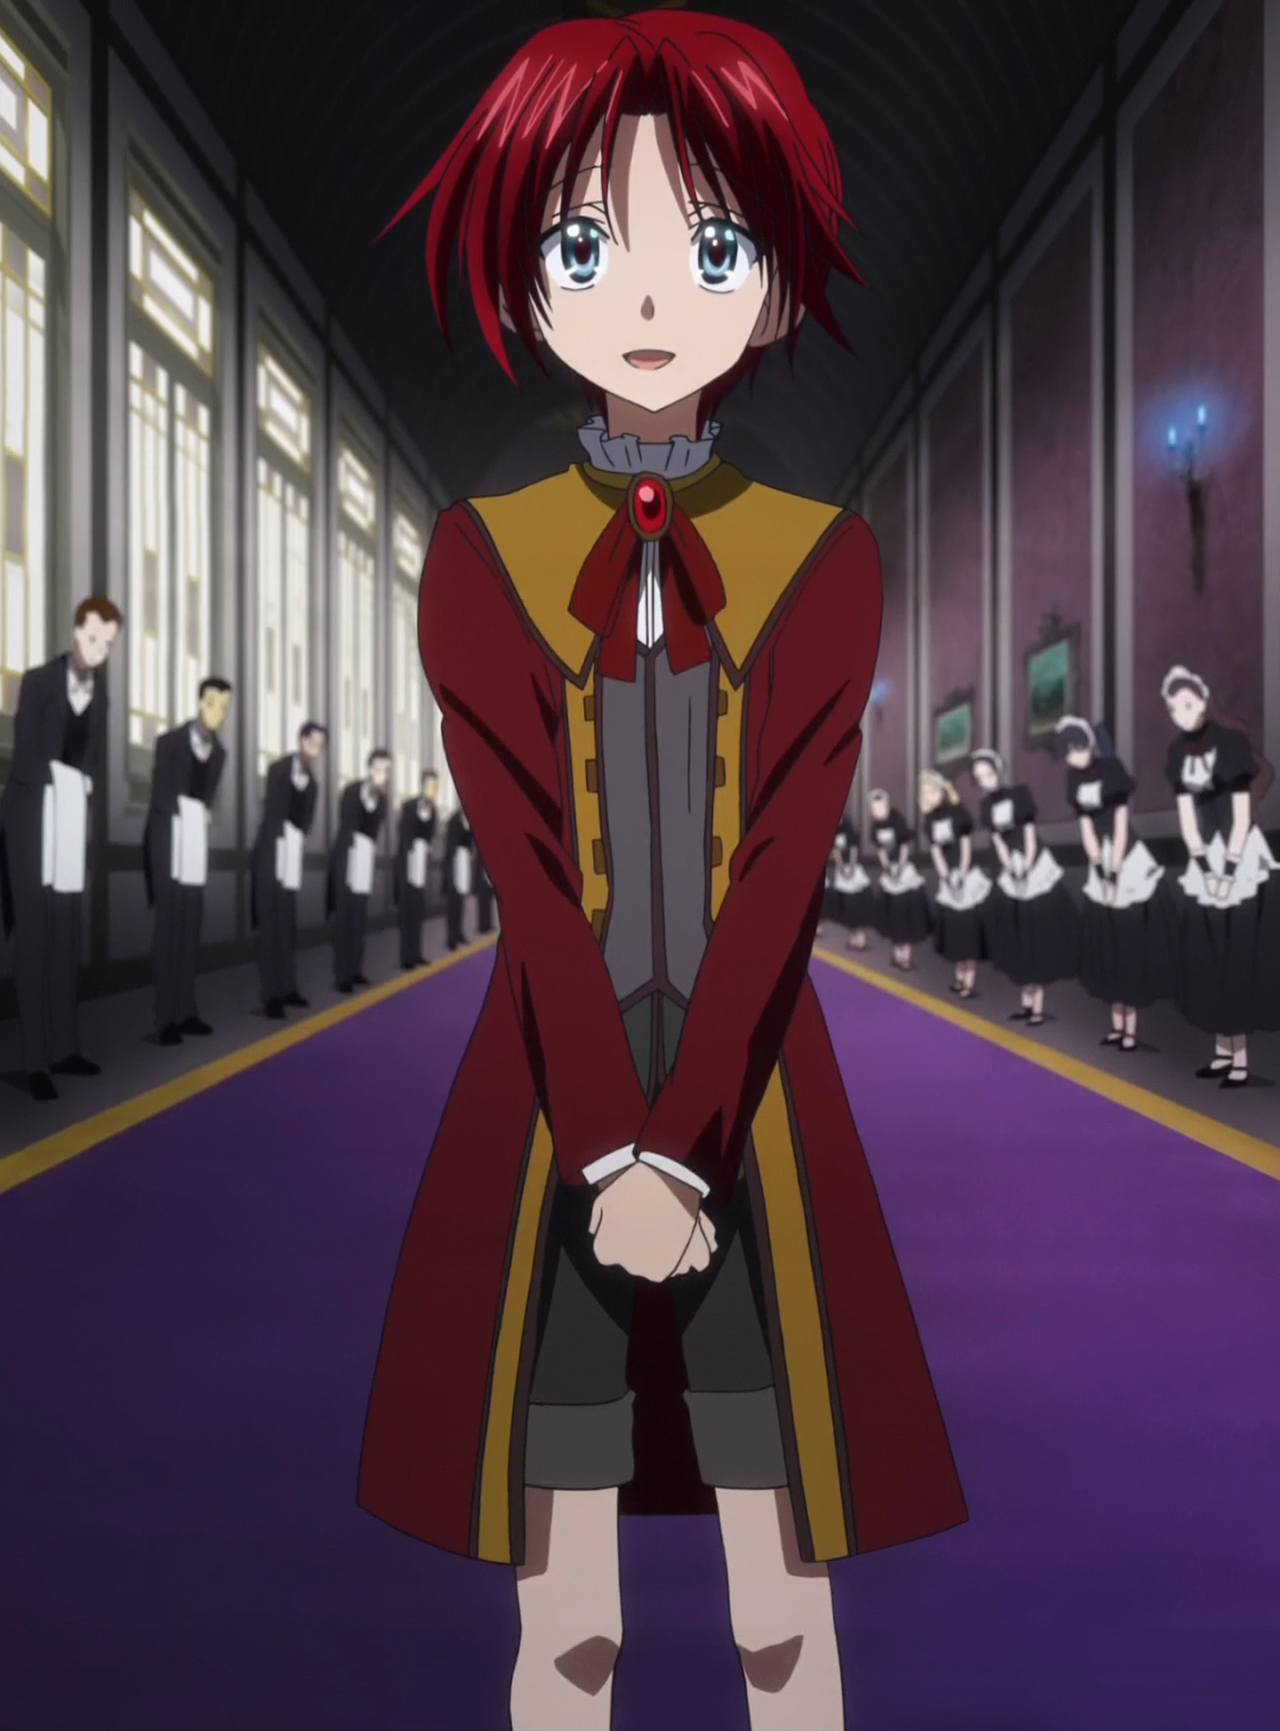 Rias Gremory's Peerage, High School DxD Wiki